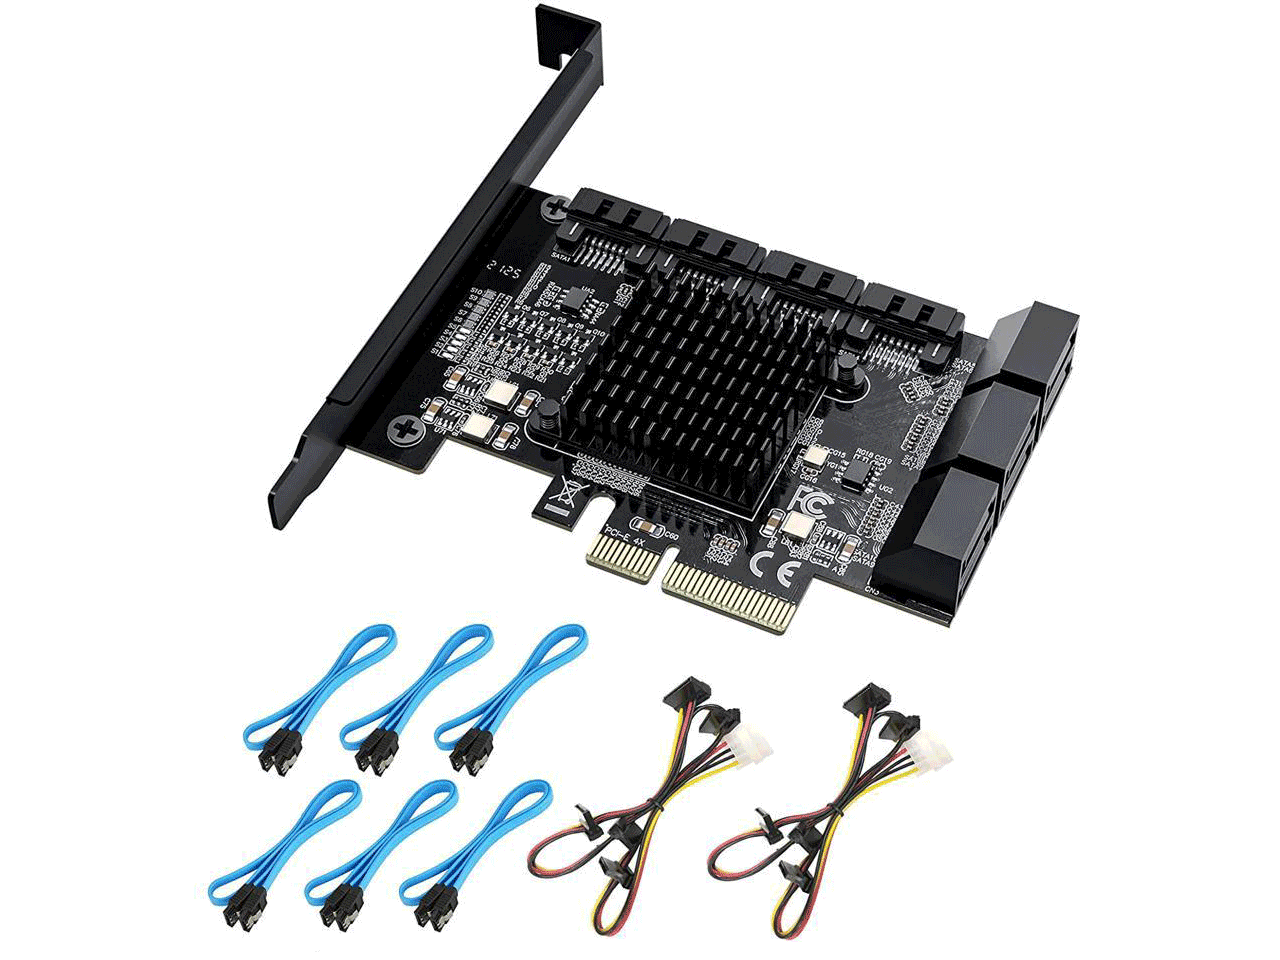 8 Port with 8 SATA Cables and 2 Power Splitter Cables SATA 3.0 Controller Expansion Card with Standard Profile Bracket Acasis PCIe SATA Card 6Gbps PCI-E X1 Host Controller Card Up To 80TB Expansion 